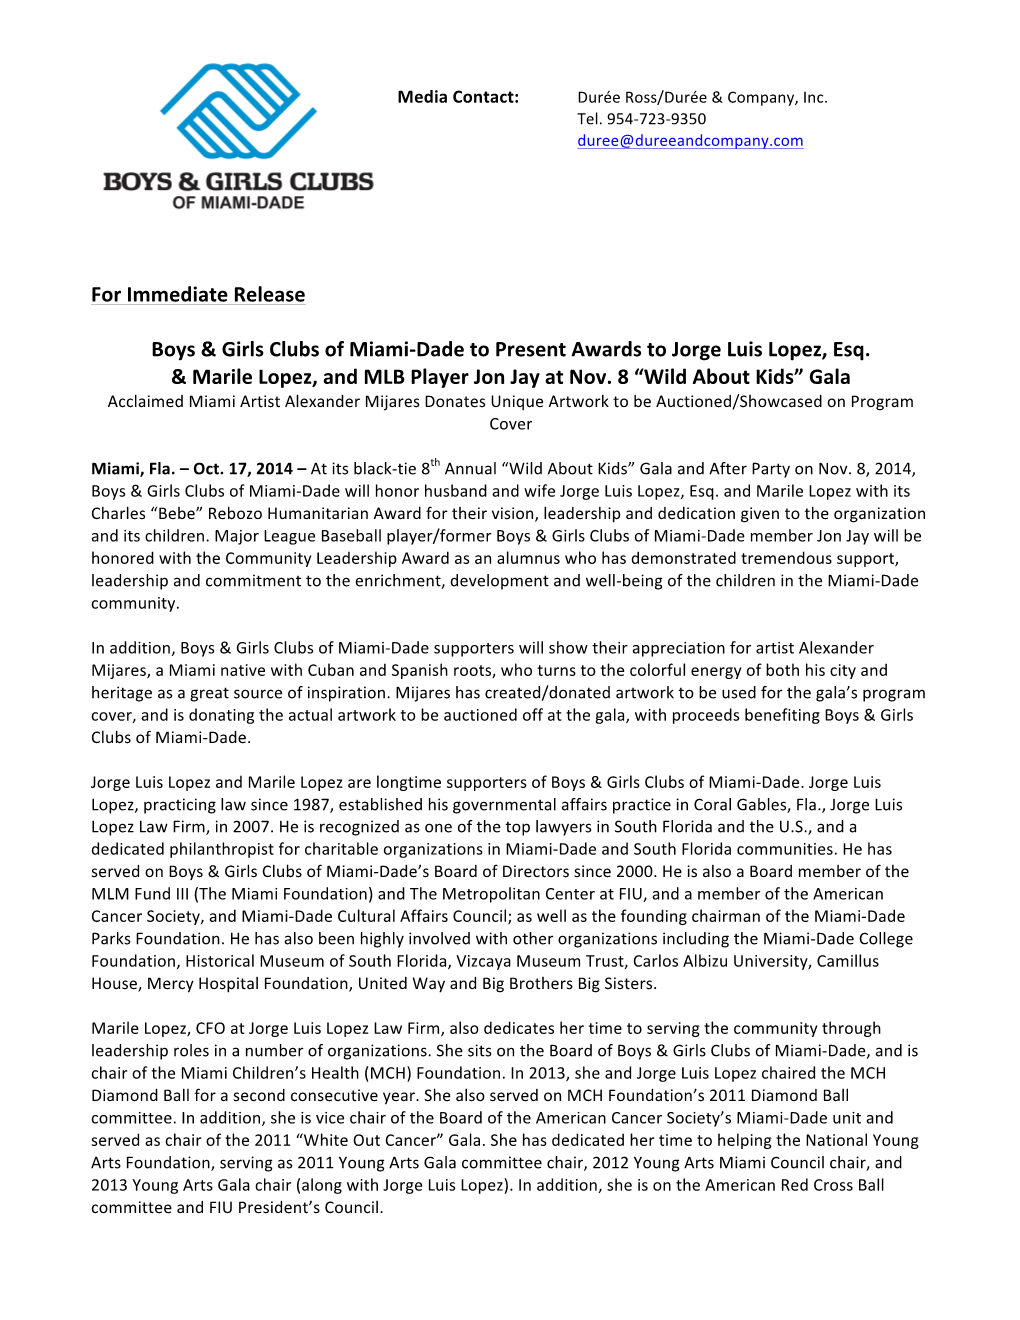 For Immediate Release Boys & Girls Clubs of Miami-‐Dade to Present